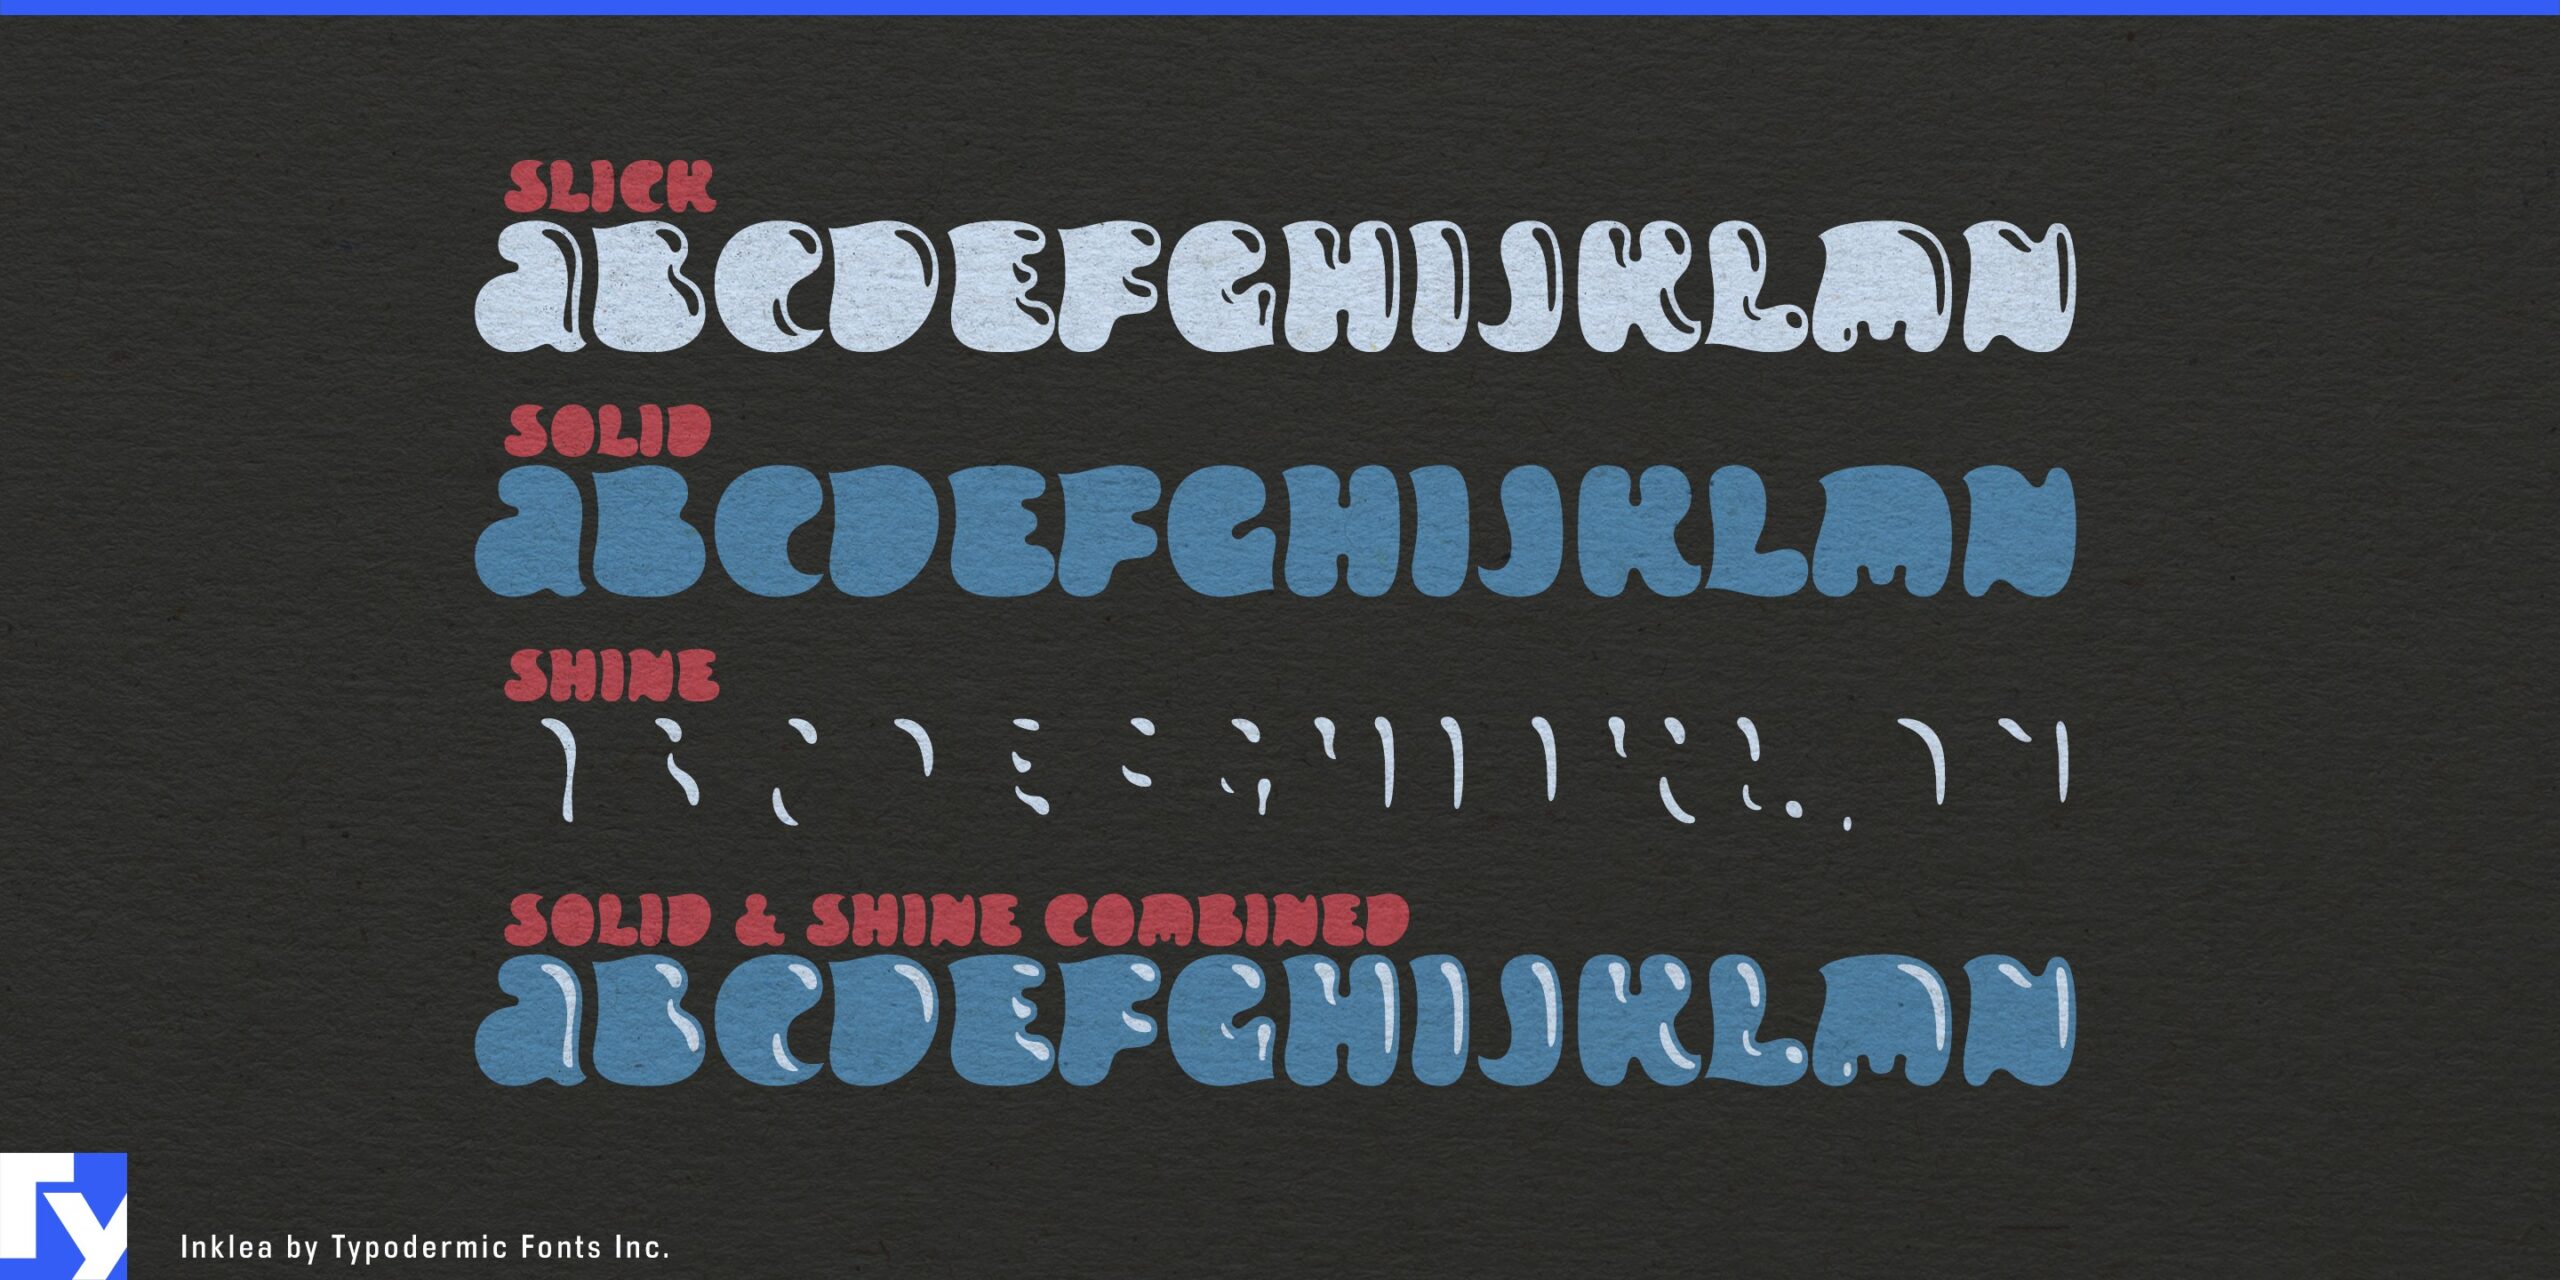 Elegant and Efficient: Inklea Typeface in Action